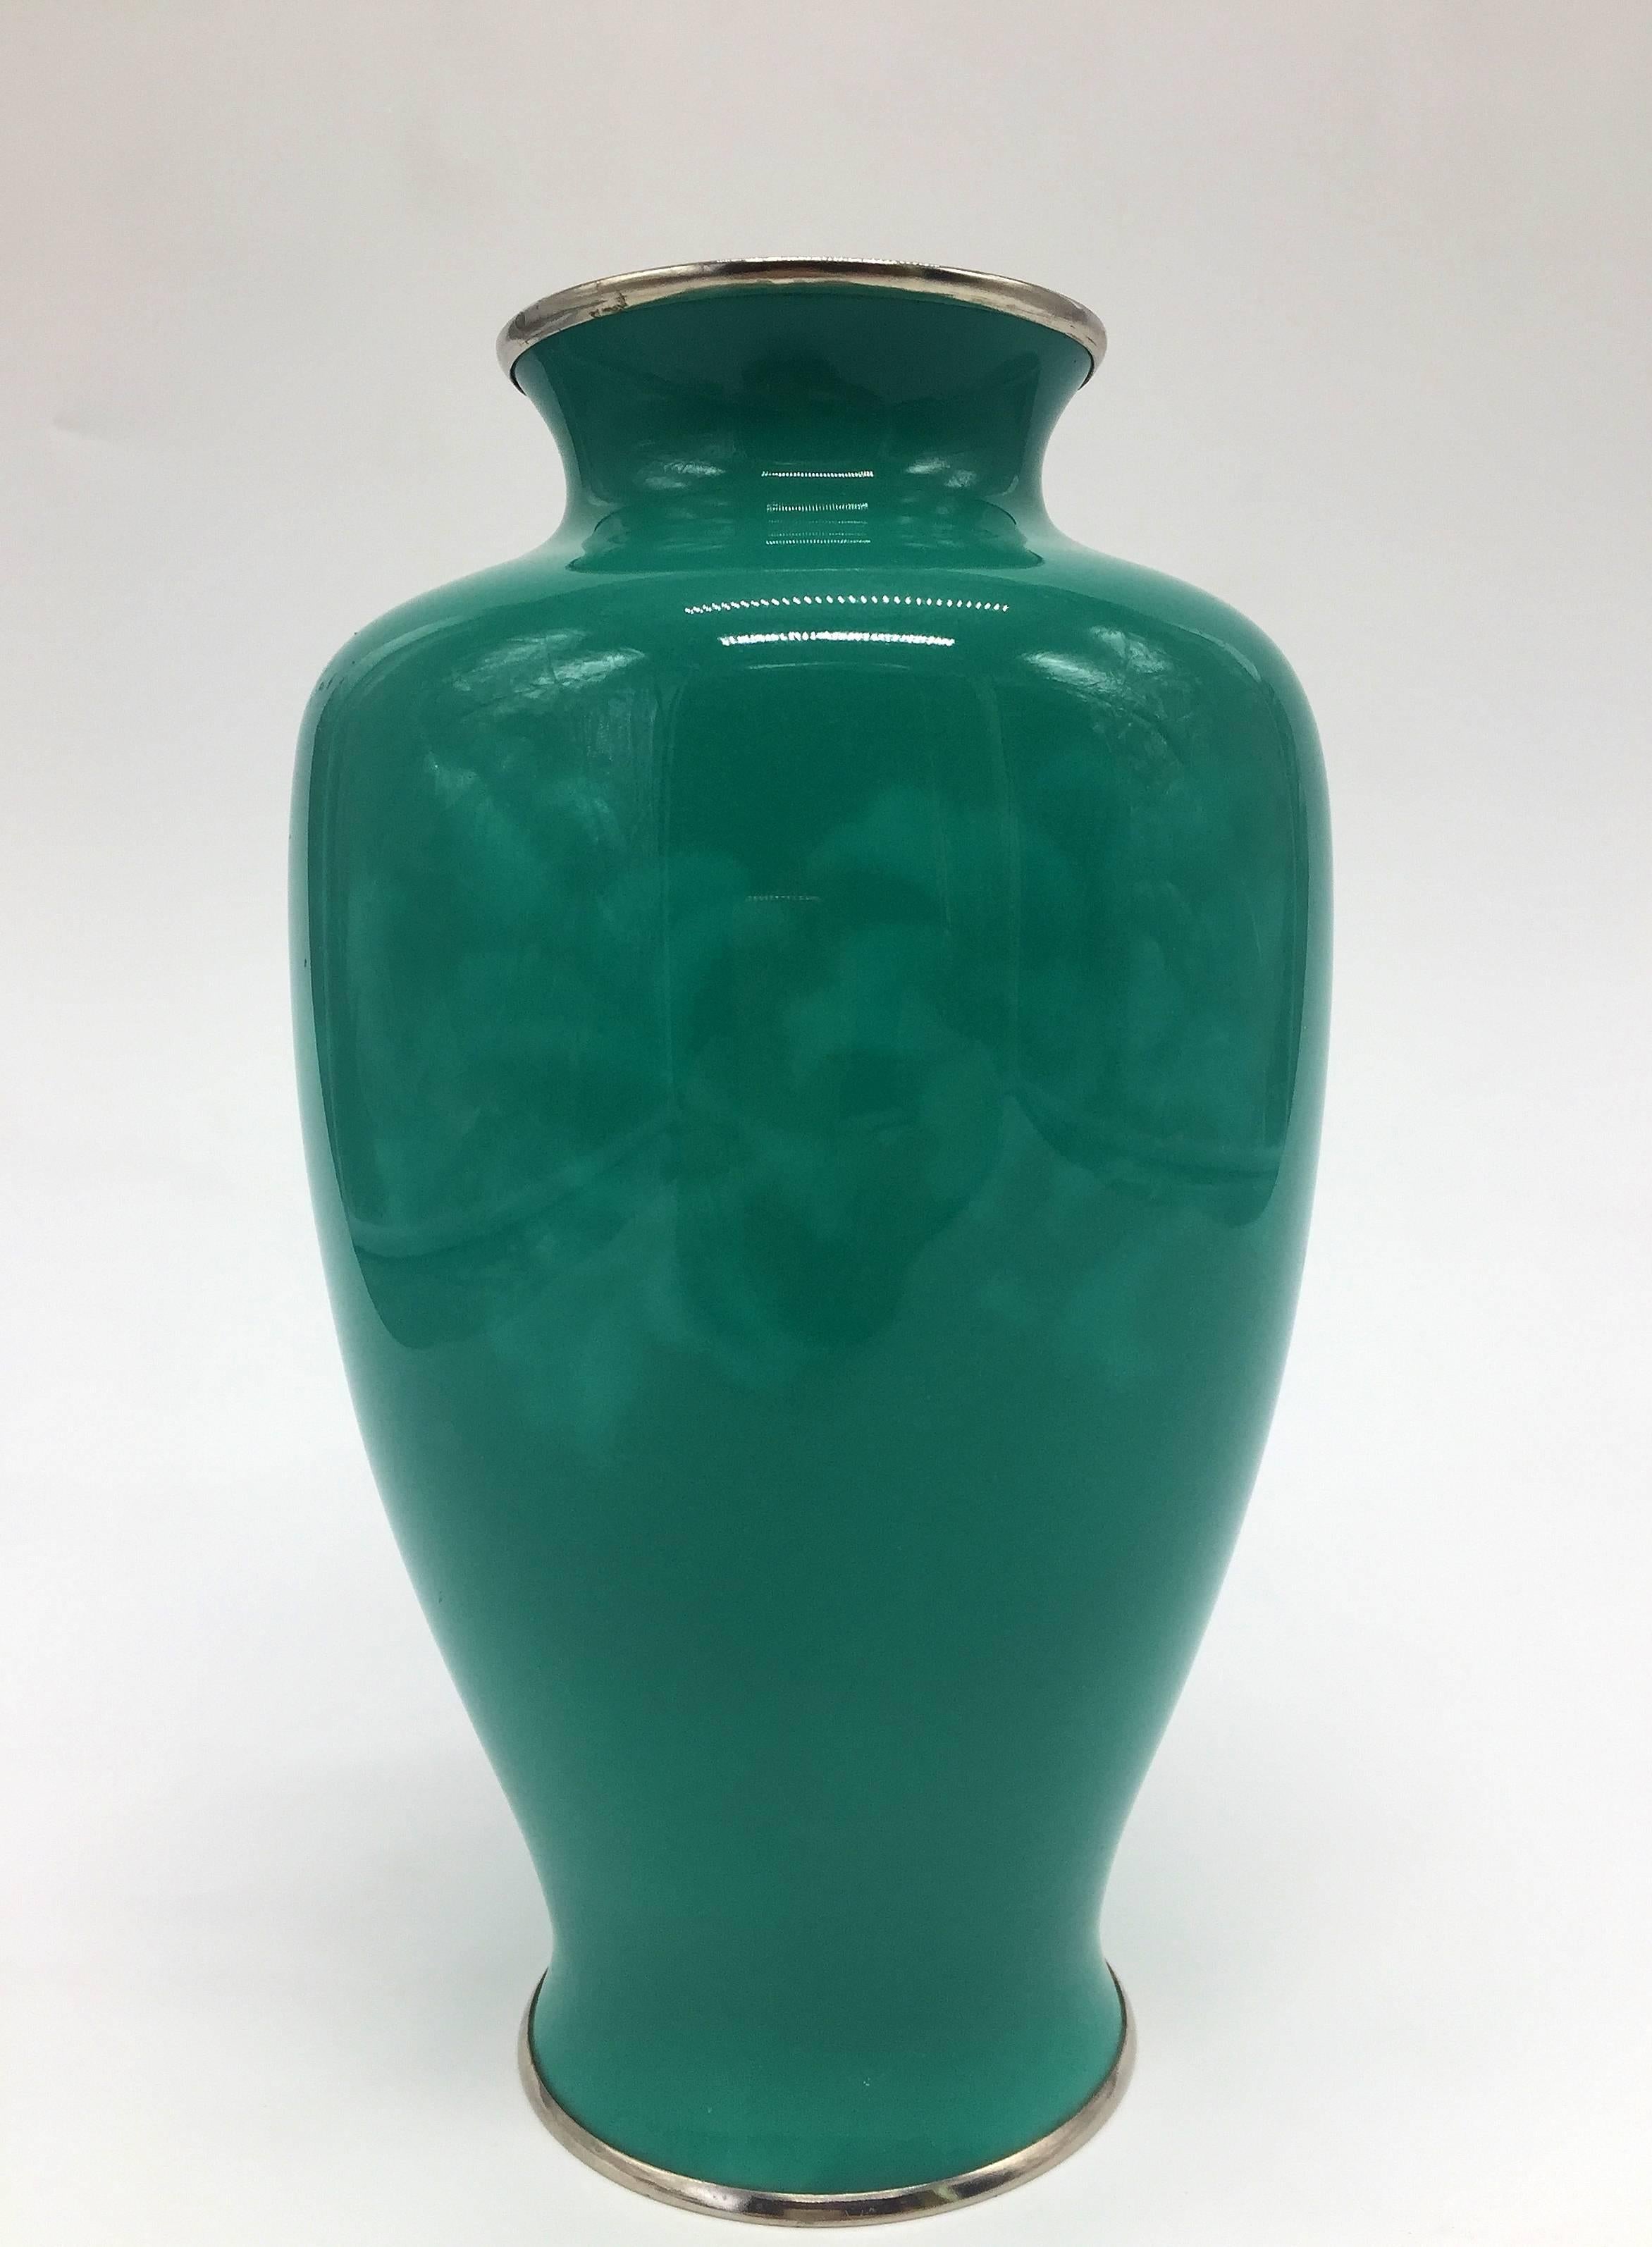 Beautiful vase in near perfect condition. Signed with the Ando mark at the base.

Featuring a floral which appears to be chrysanthemum, the vase has elegant lines, perfect proportions and the finest finish in high gloss. The wireless cloisonné